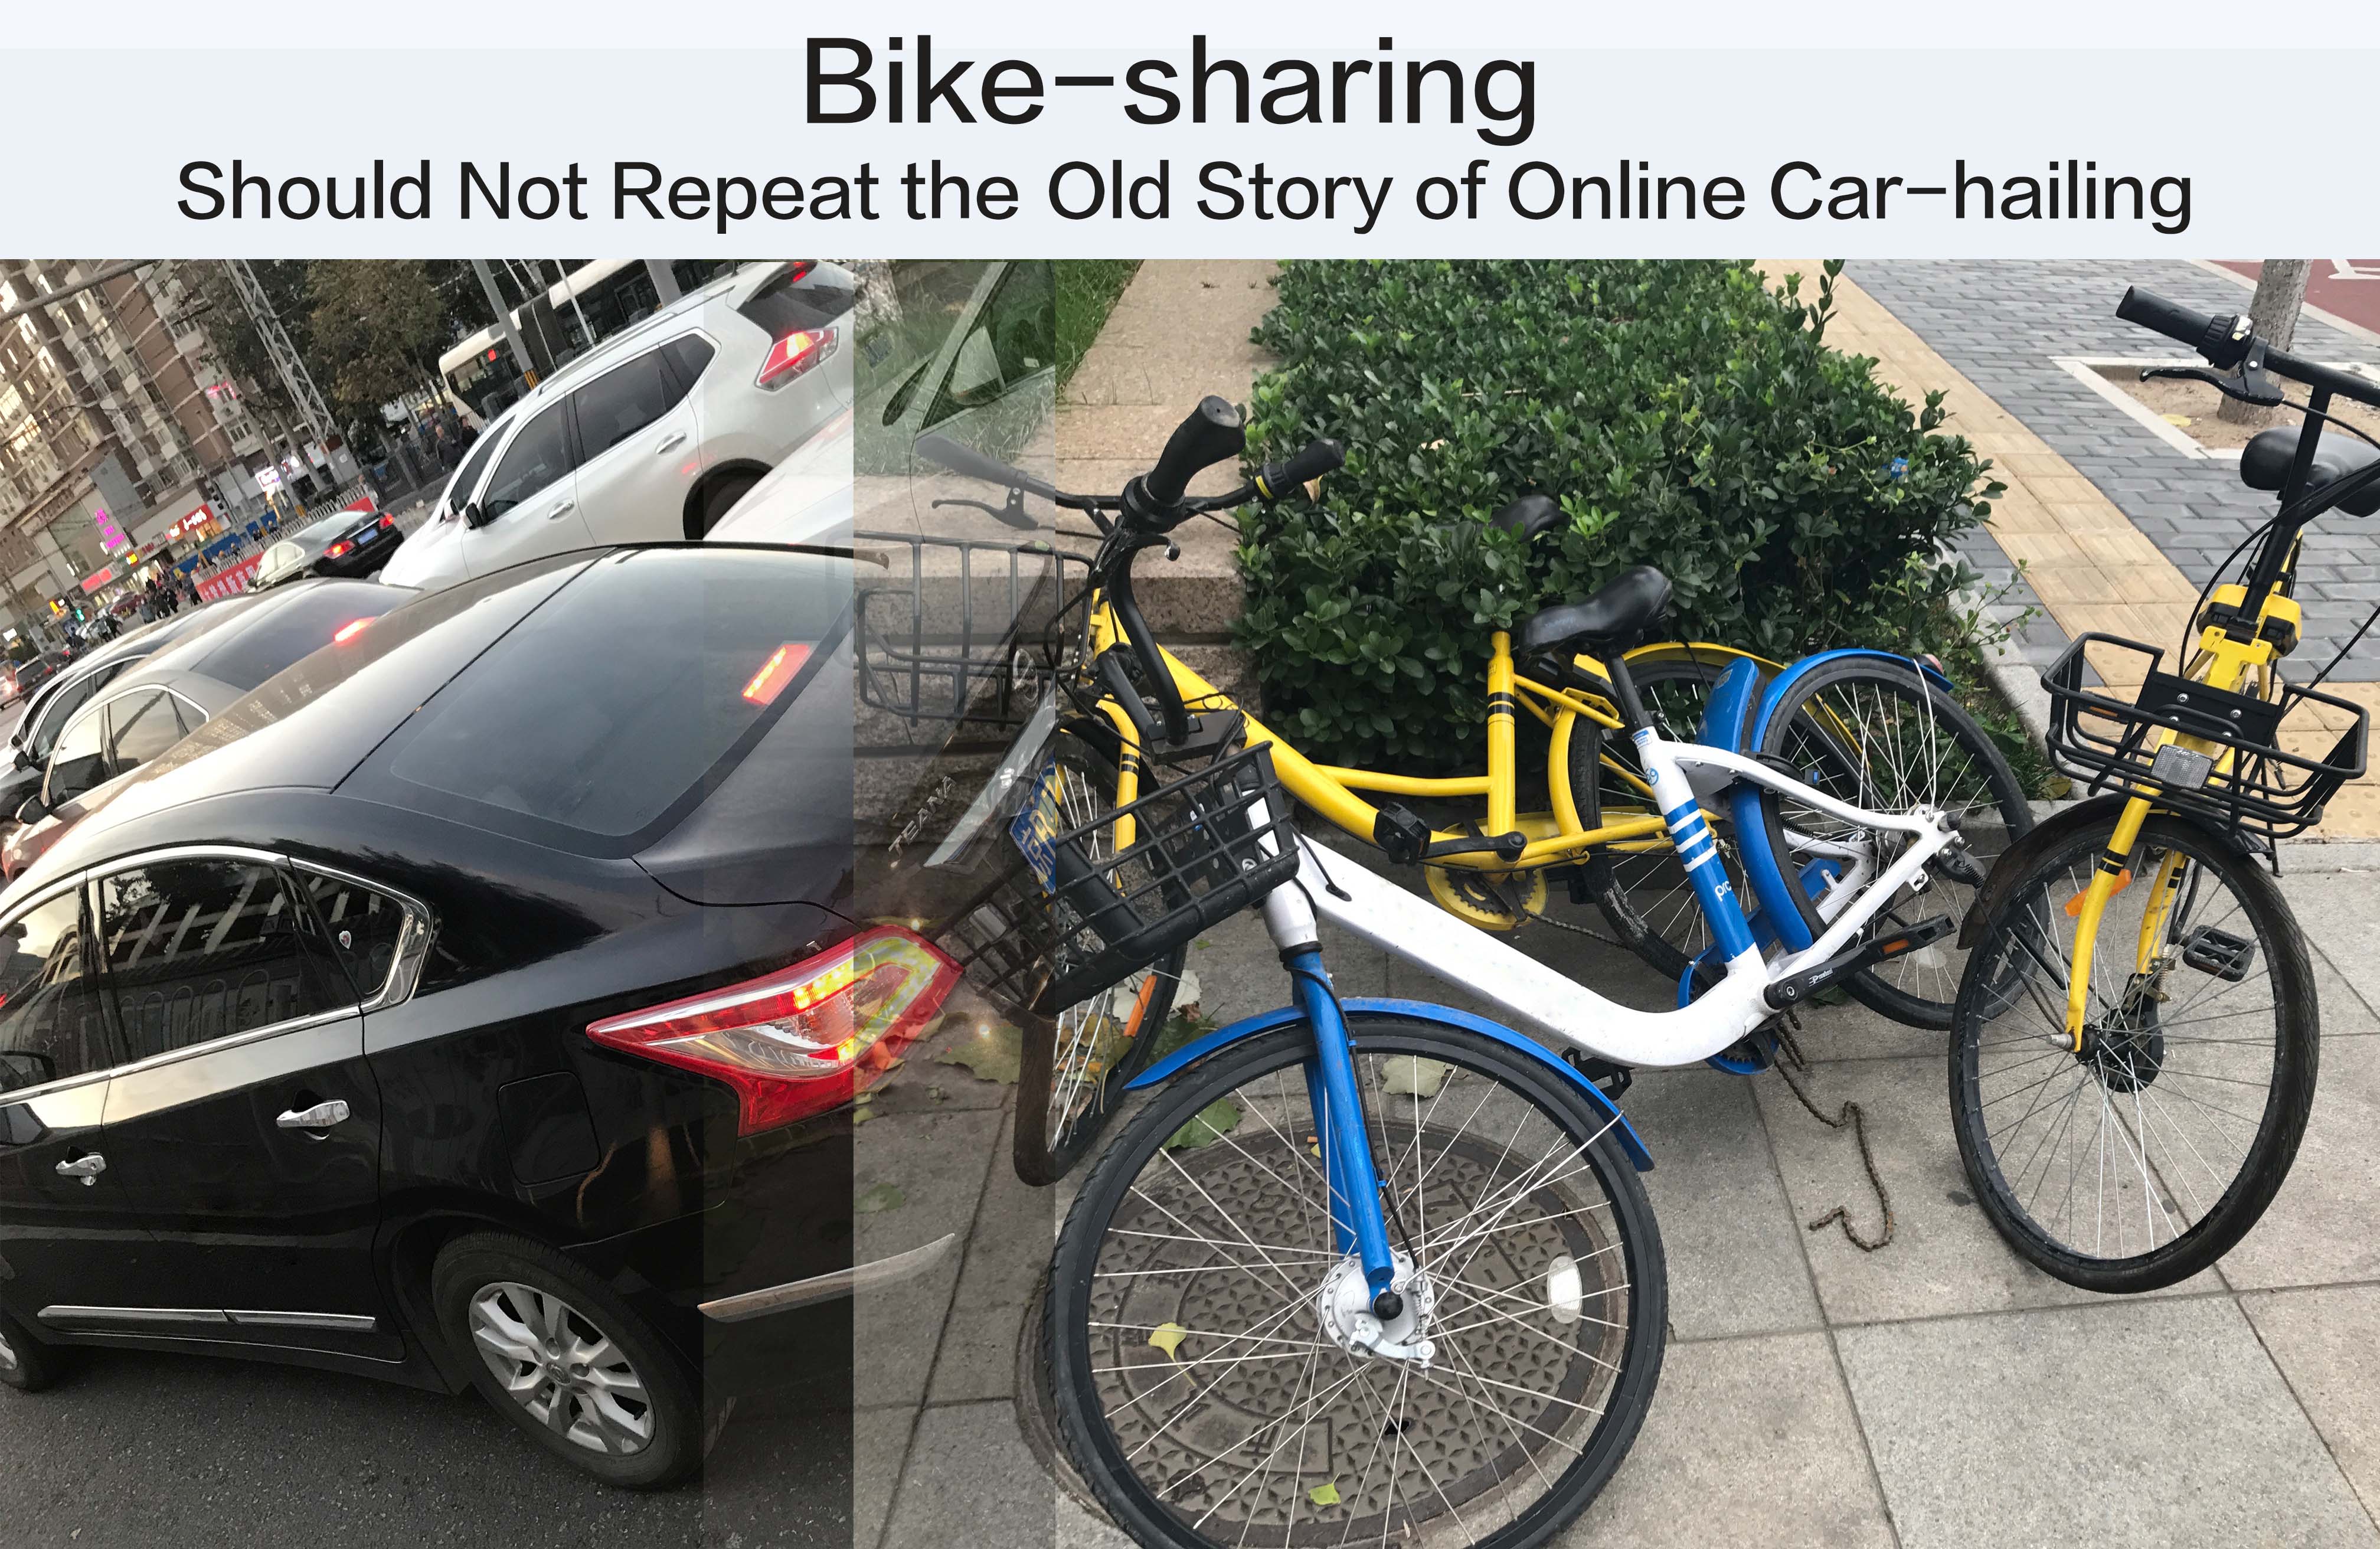 Bike-sharing Should Not Repeat the Old Story of Online Car-hailing